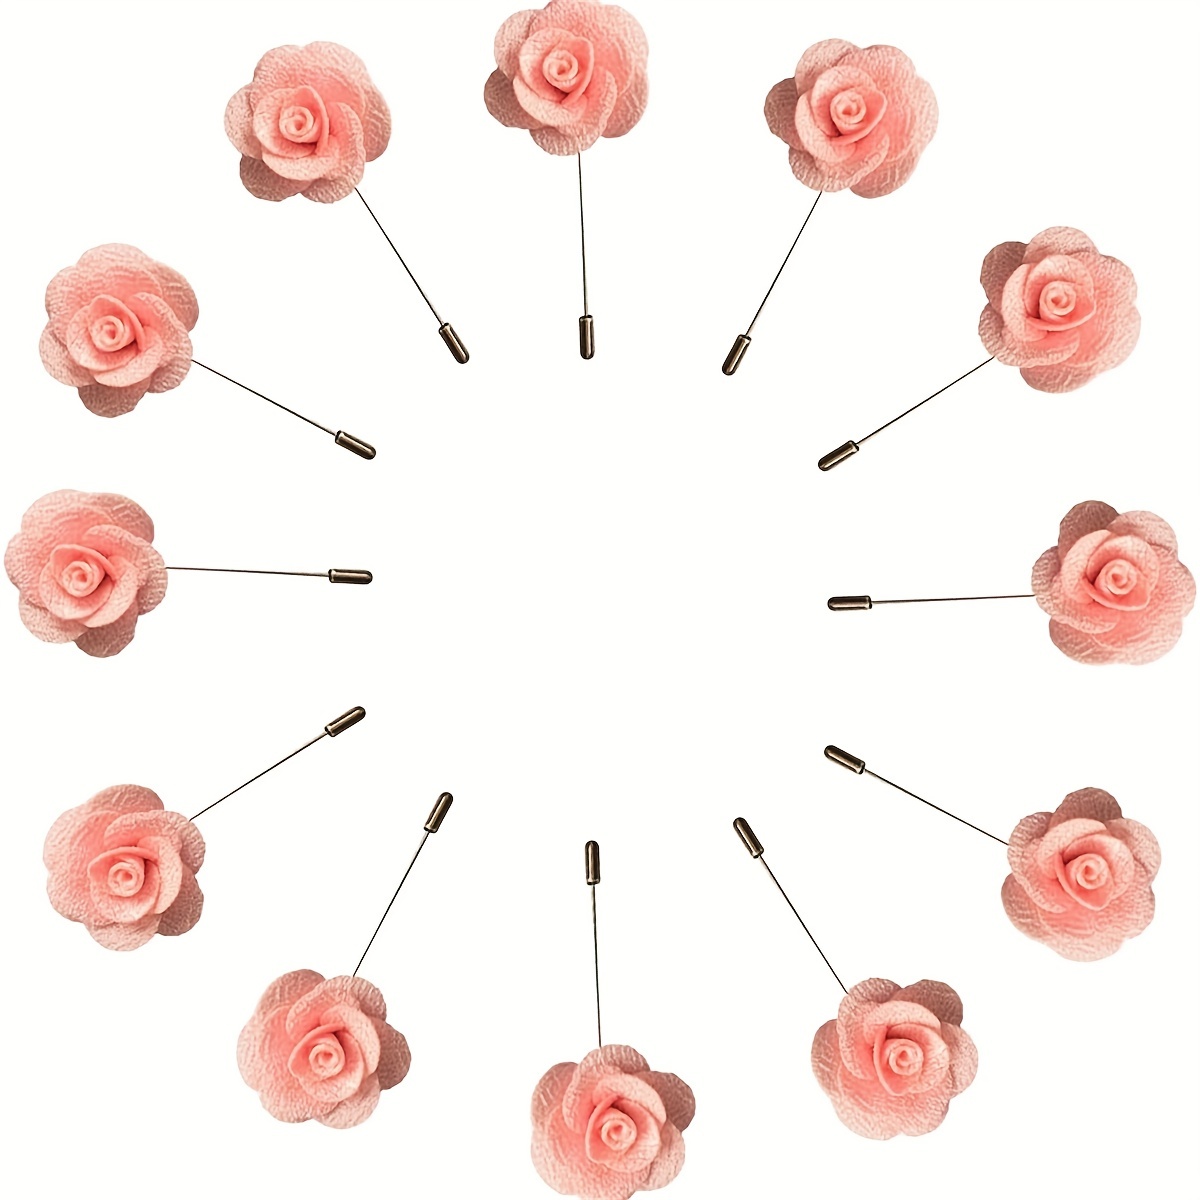 Pin on Roses in accessories